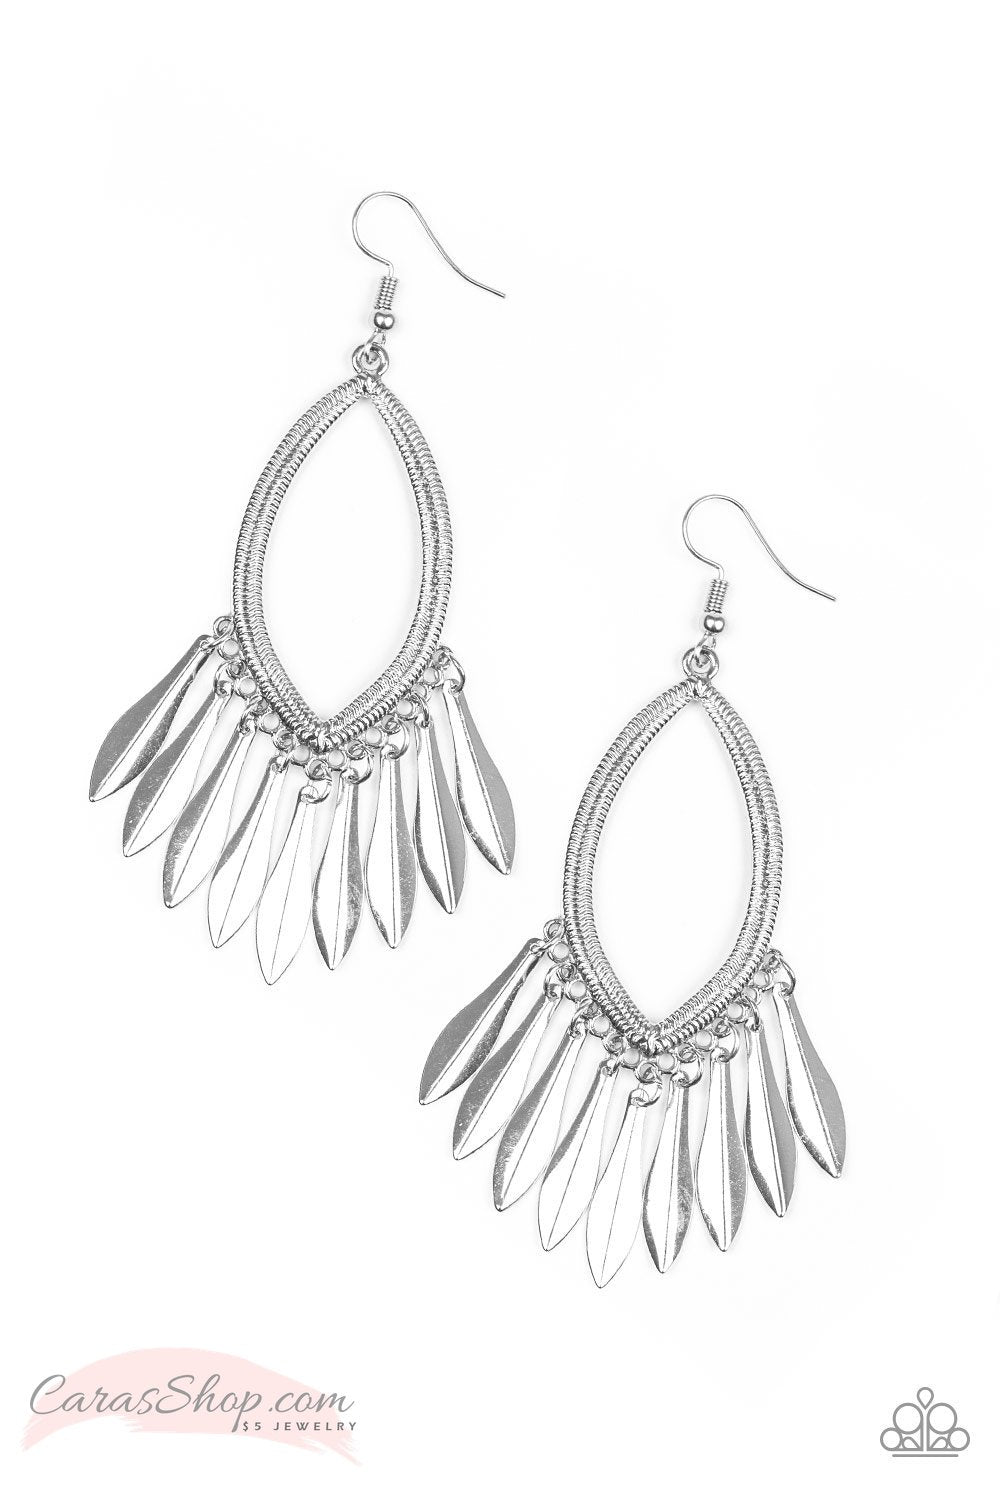 My FLAIR Lady Silver Earrings - Paparazzi Accessories-CarasShop.com - $5 Jewelry by Cara Jewels